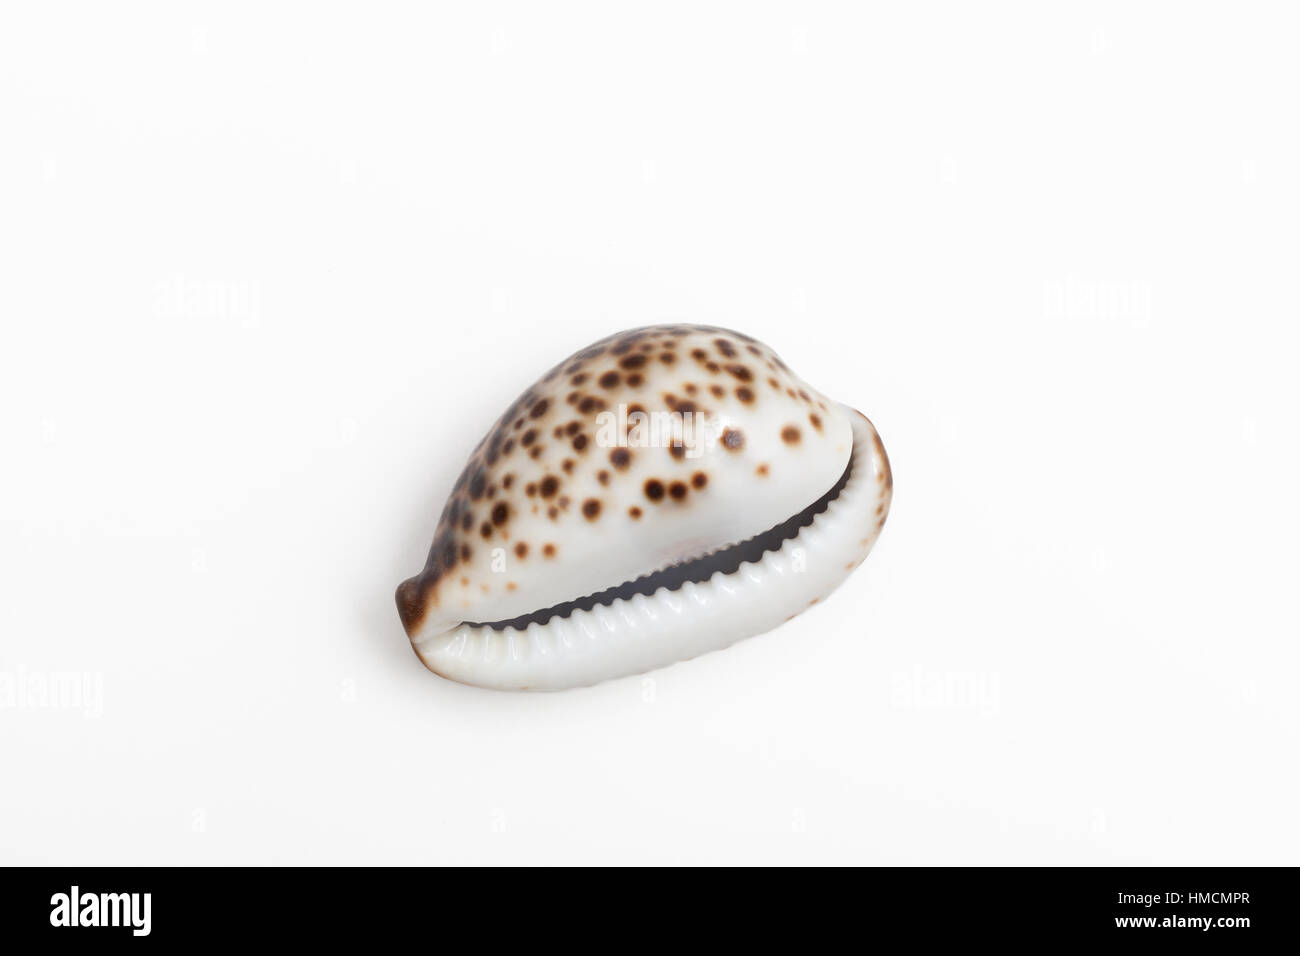 A type of sea snail called a cowrie or cowry Stock Photo